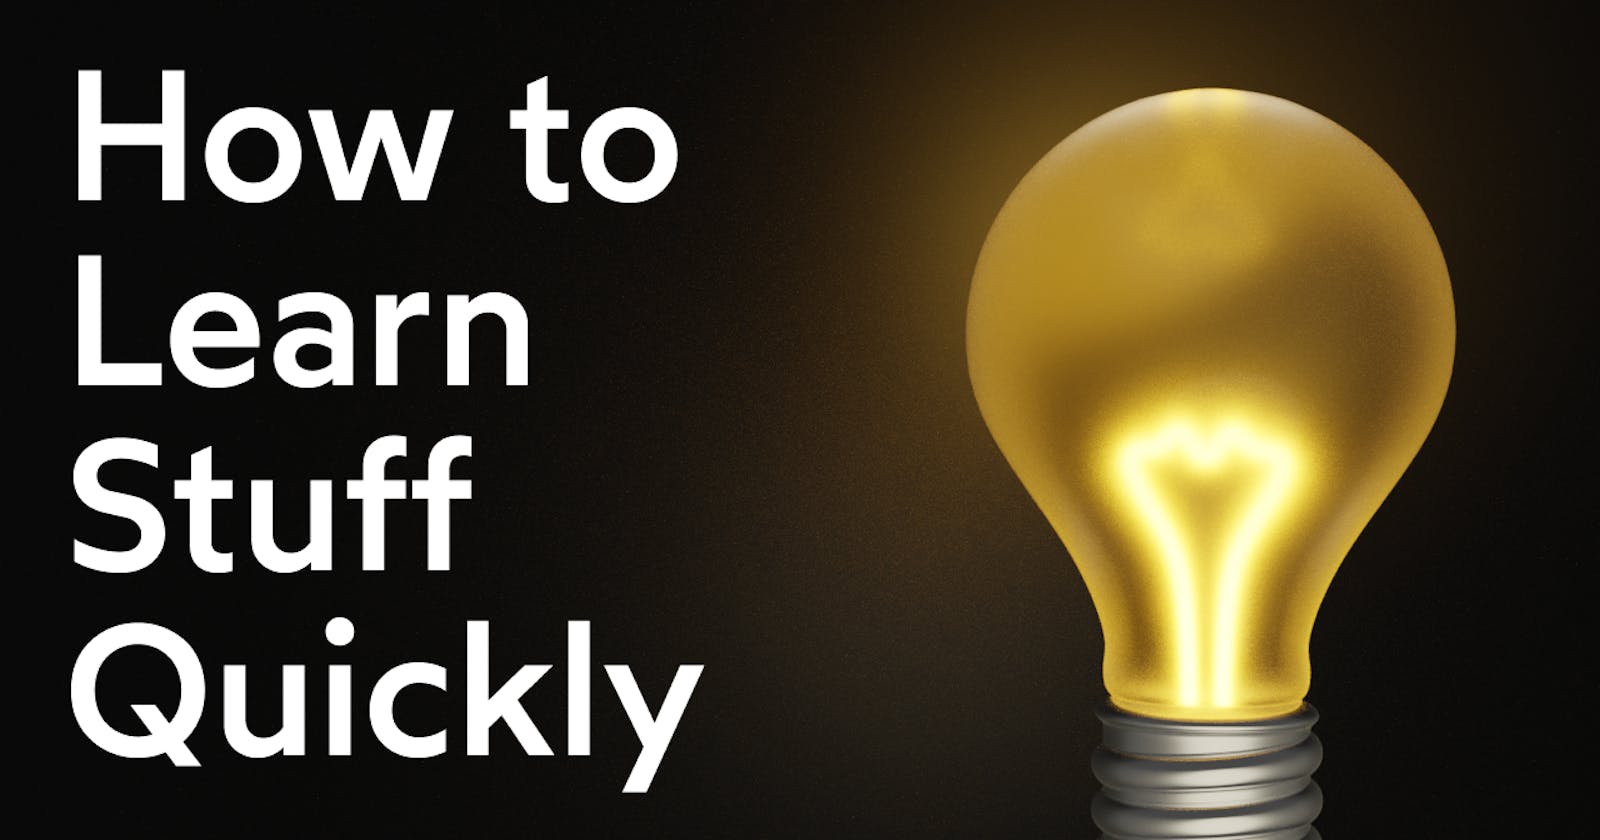 How To Learn Stuff Quickly